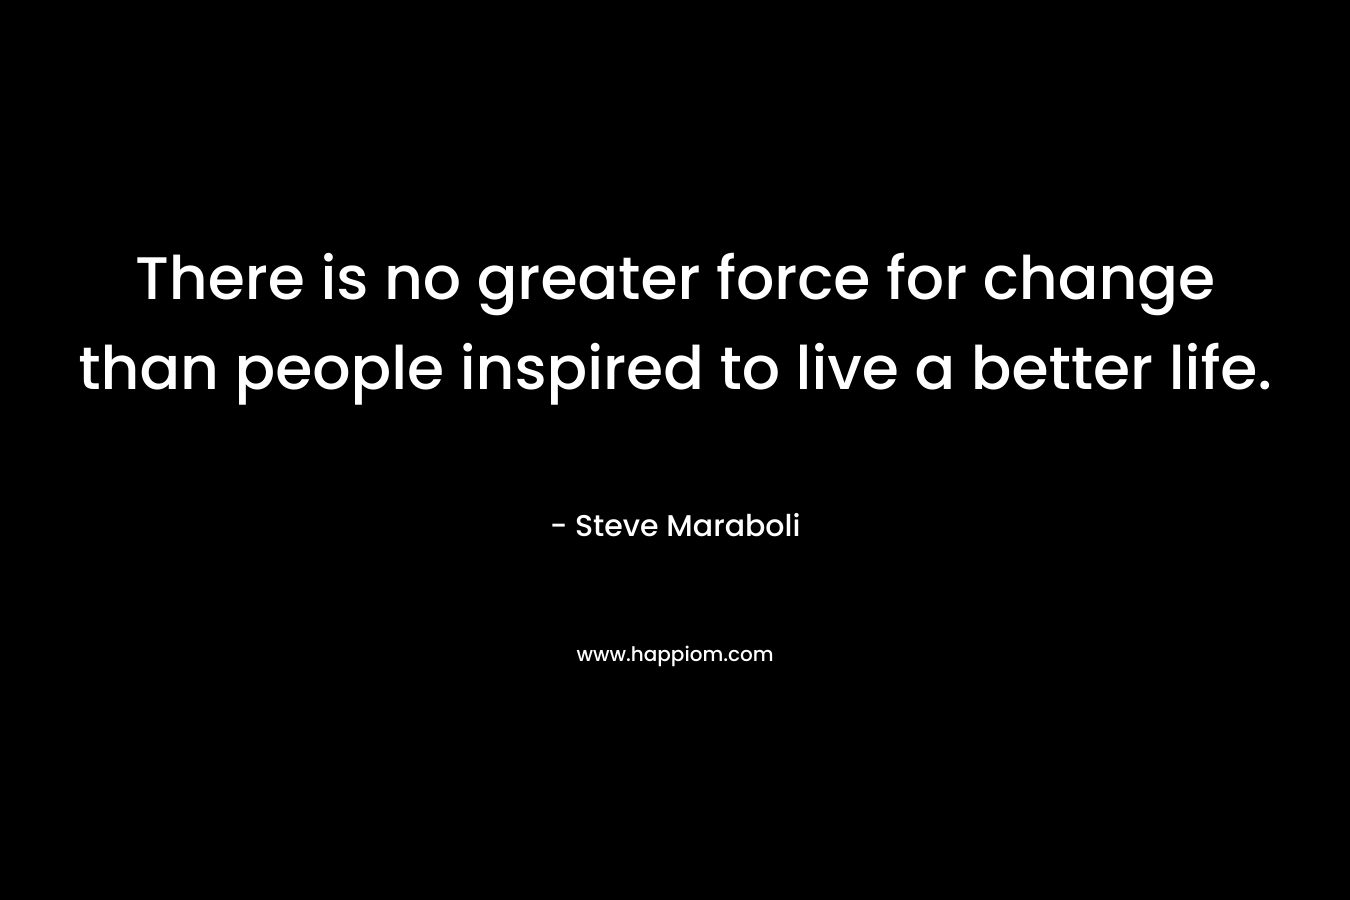 There is no greater force for change than people inspired to live a better life.